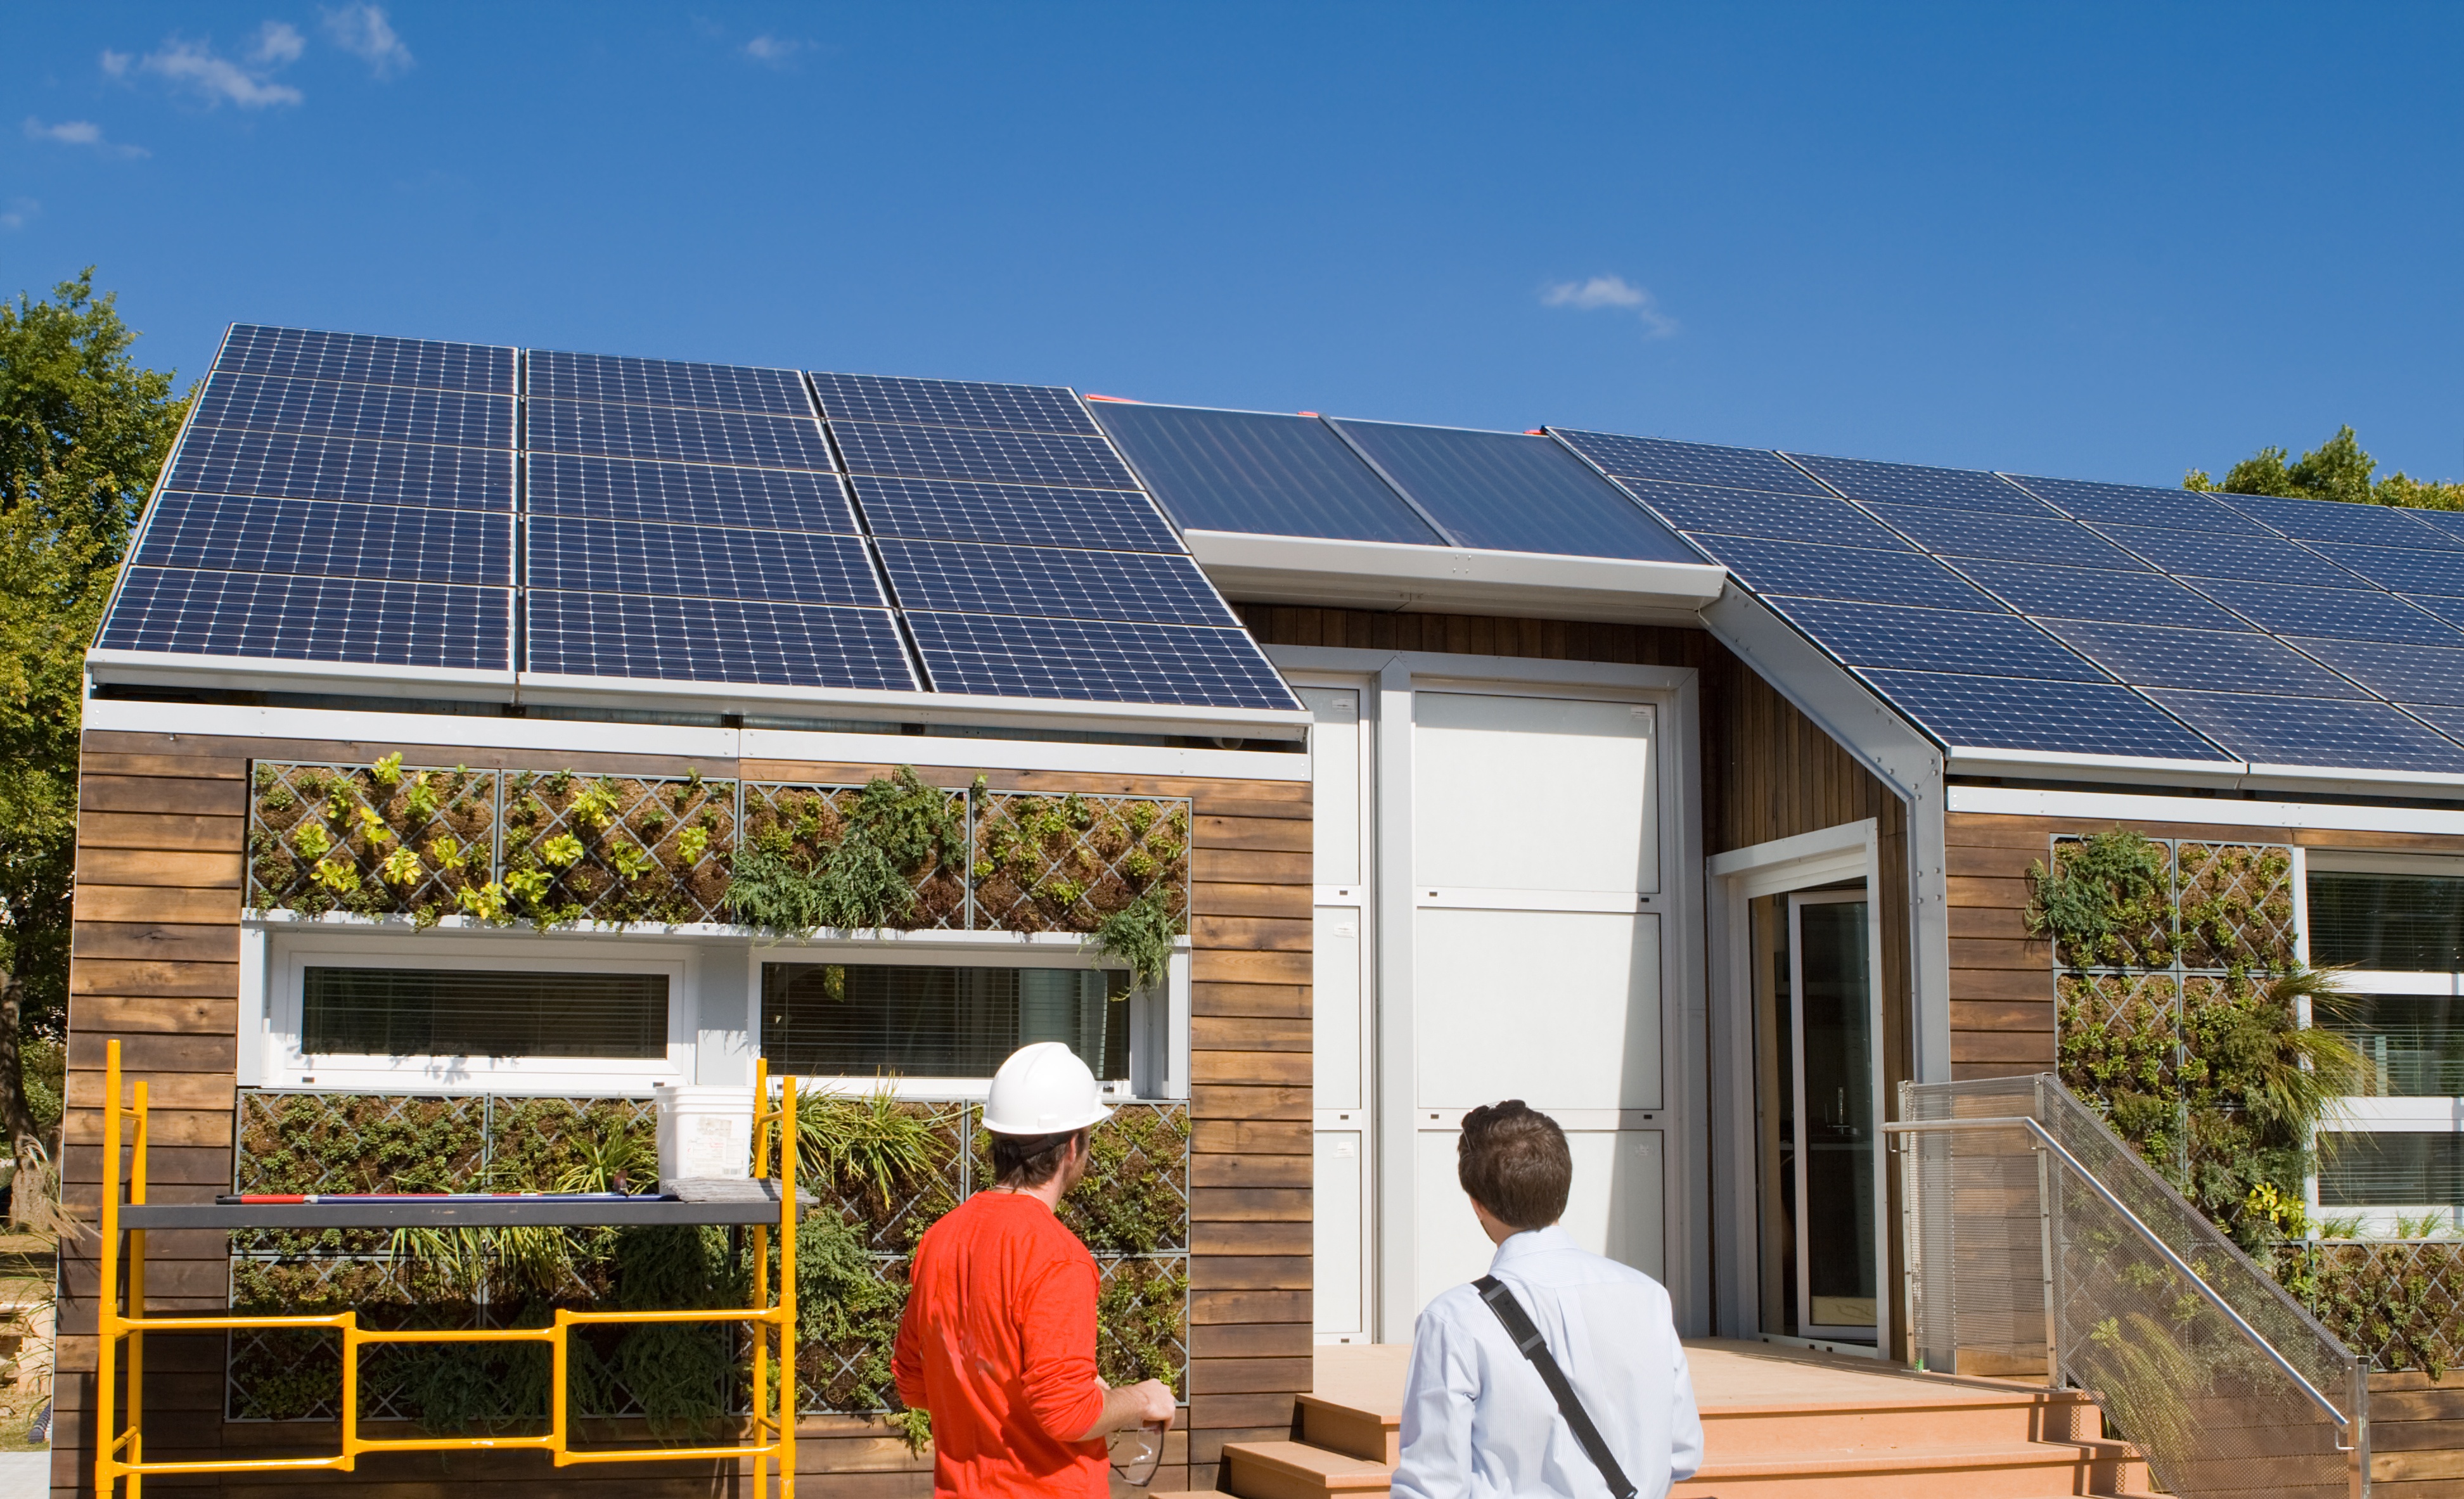 The 8 key benefits of solar for new homes in New Zealand